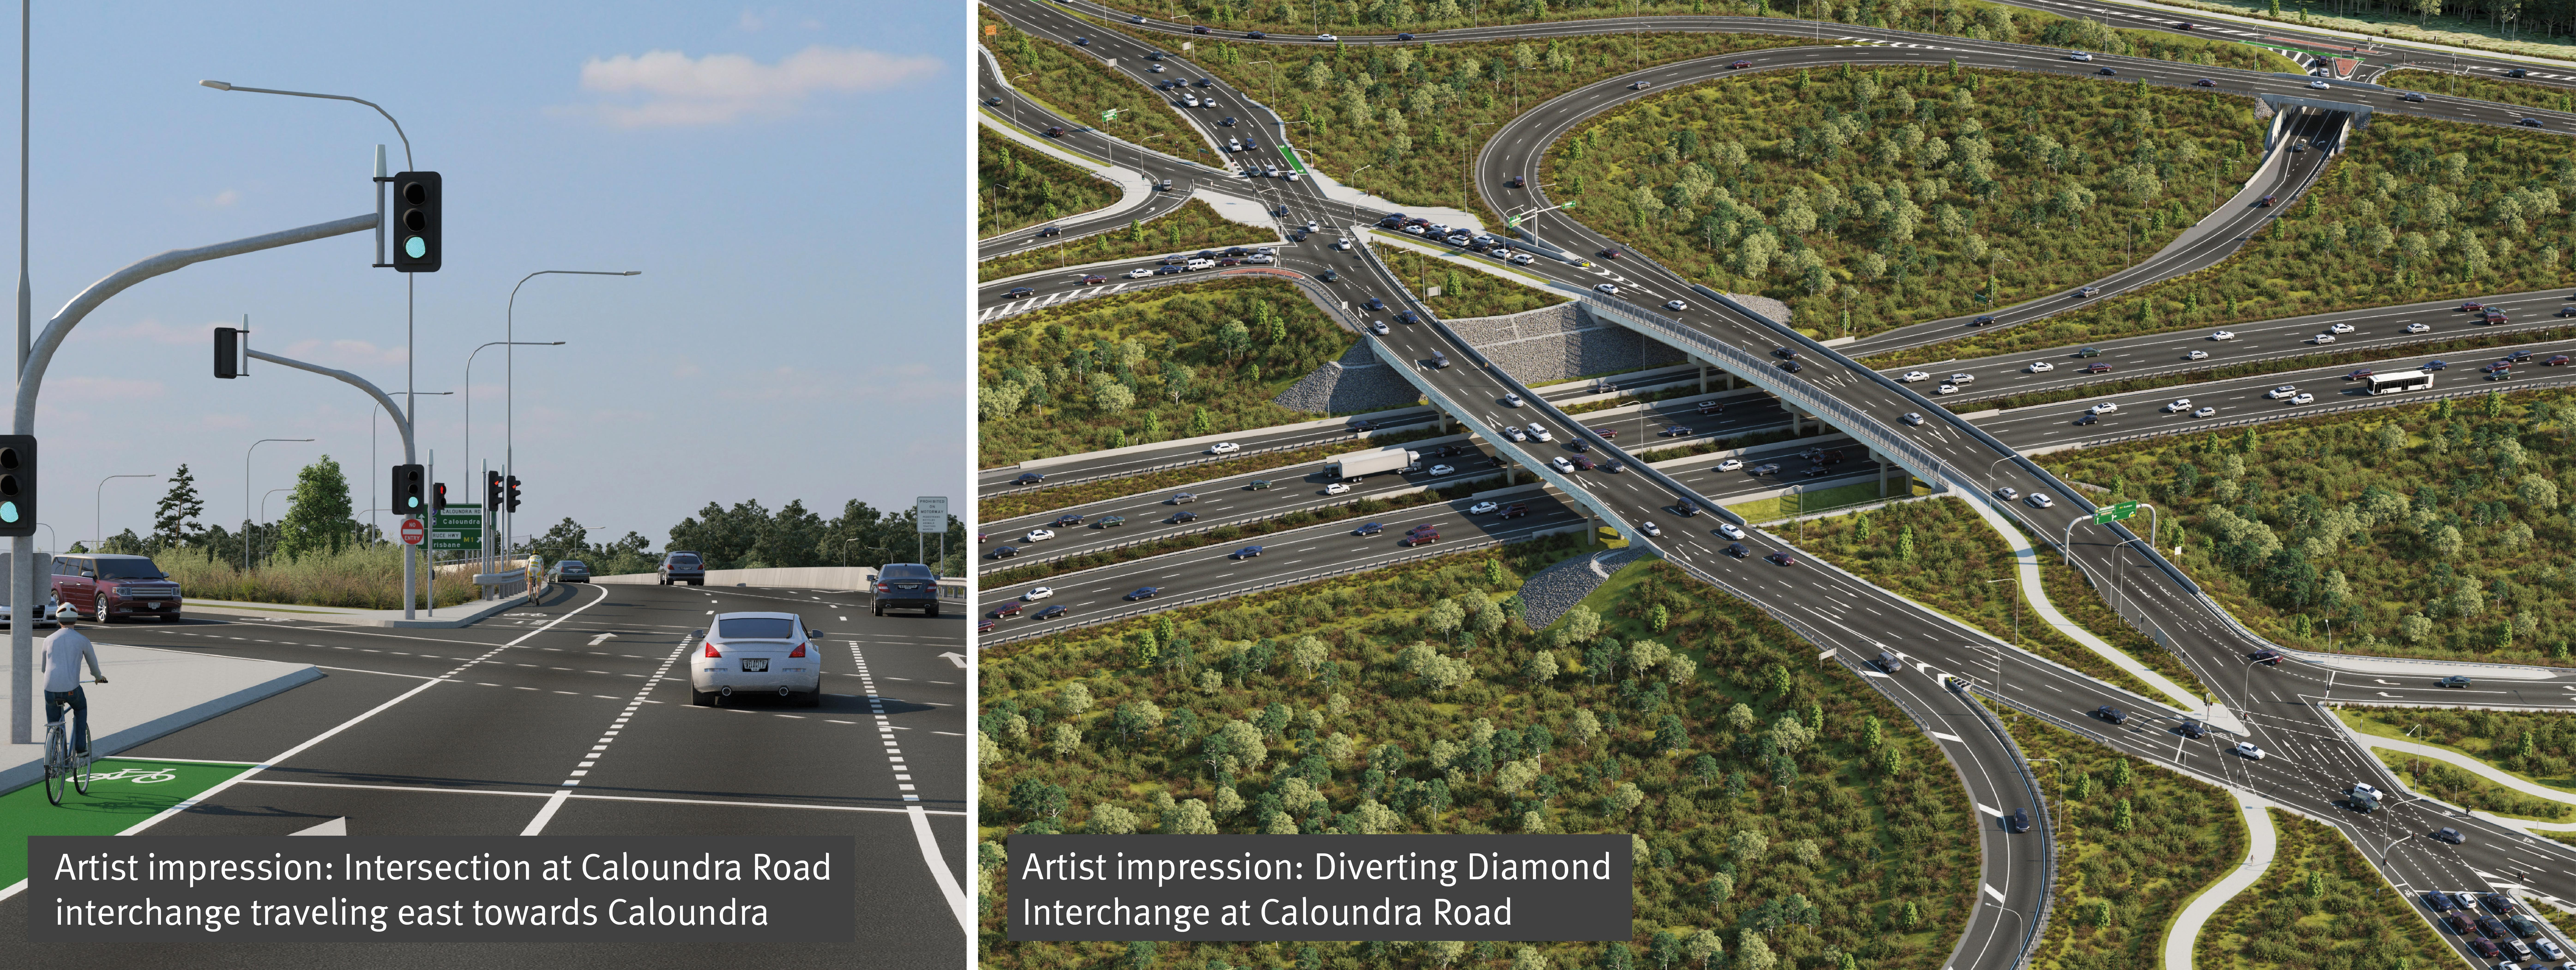 Artists impression left image intersection at Caloundra Road interchange travelling east towards Caloundra, artists impression right image diverting diamond interchange at Caloundra